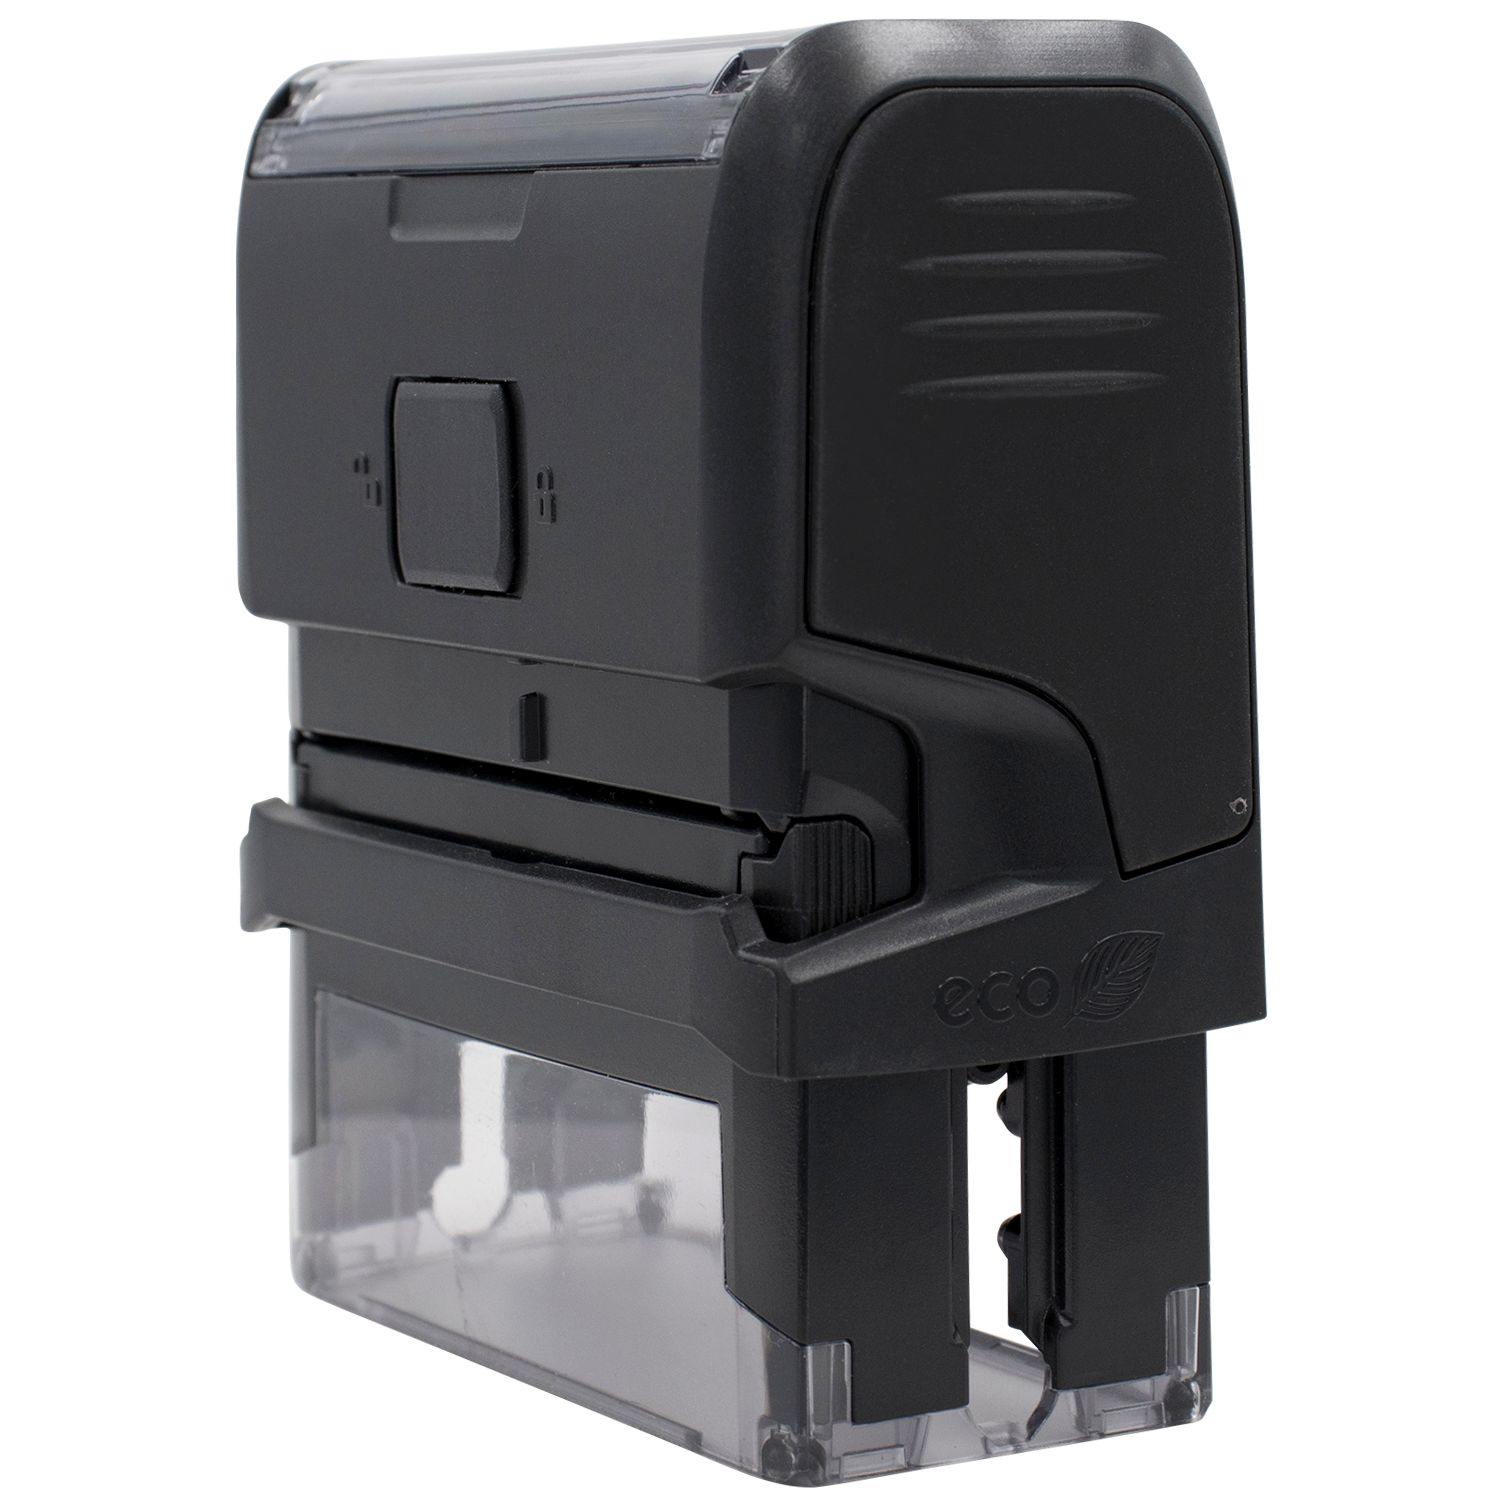 Large Self-Inking Narrow Font Cancelled Stamp - Engineer Seal Stamps - Brand_Trodat, Impression Size_Large, Stamp Type_Self-Inking Stamp, Type of Use_Business, Type of Use_Finance, Type of Use_Office, Type of Use_Professional